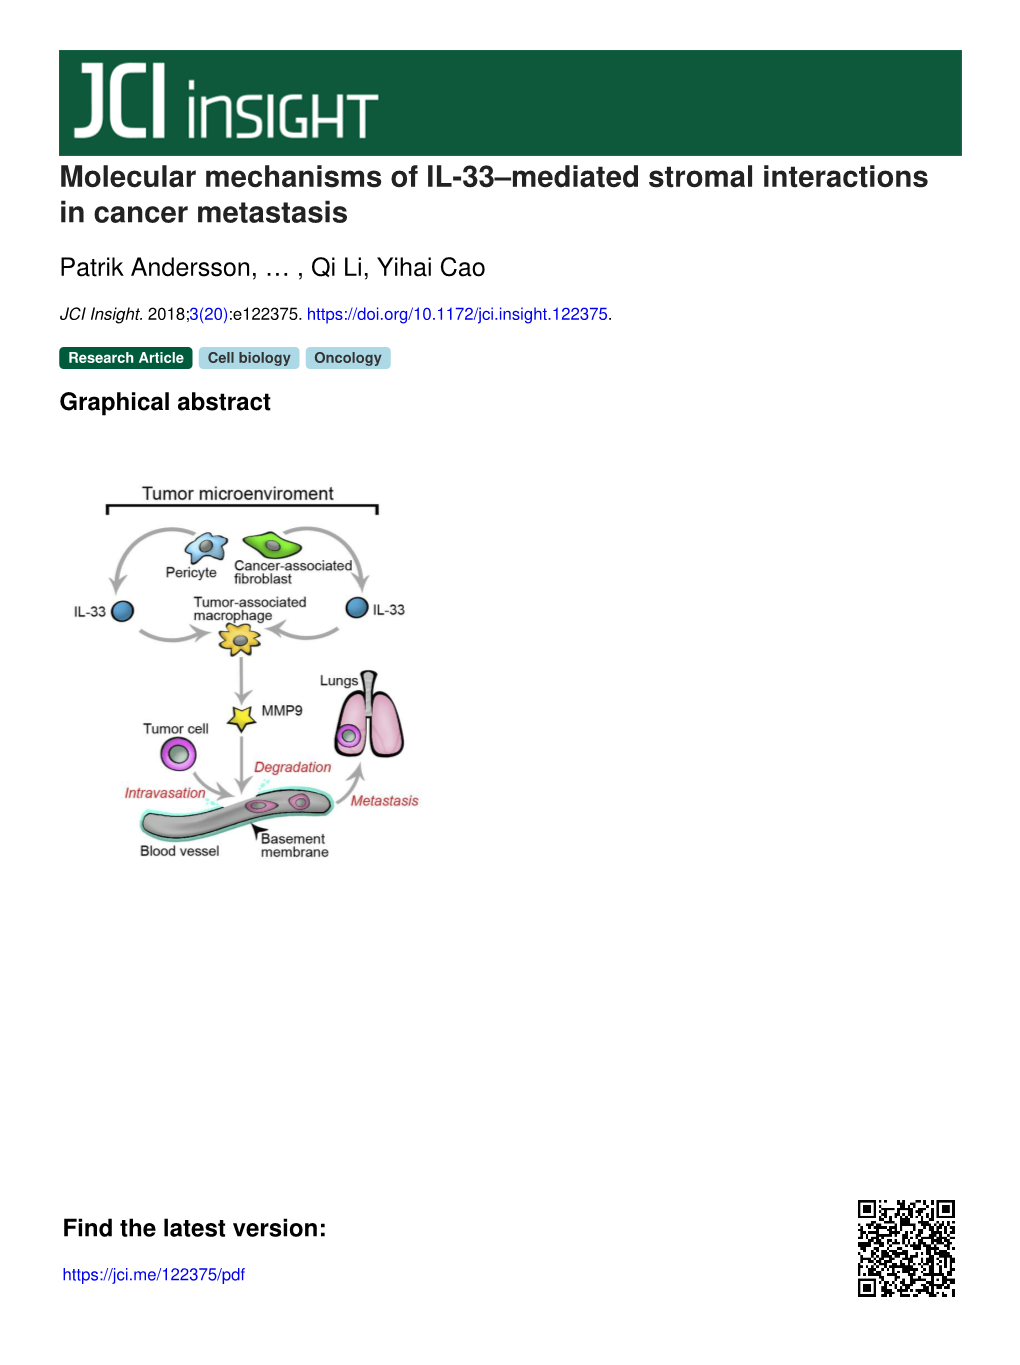 Molecular Mechanisms of IL-33–Mediated Stromal Interactions in Cancer Metastasis